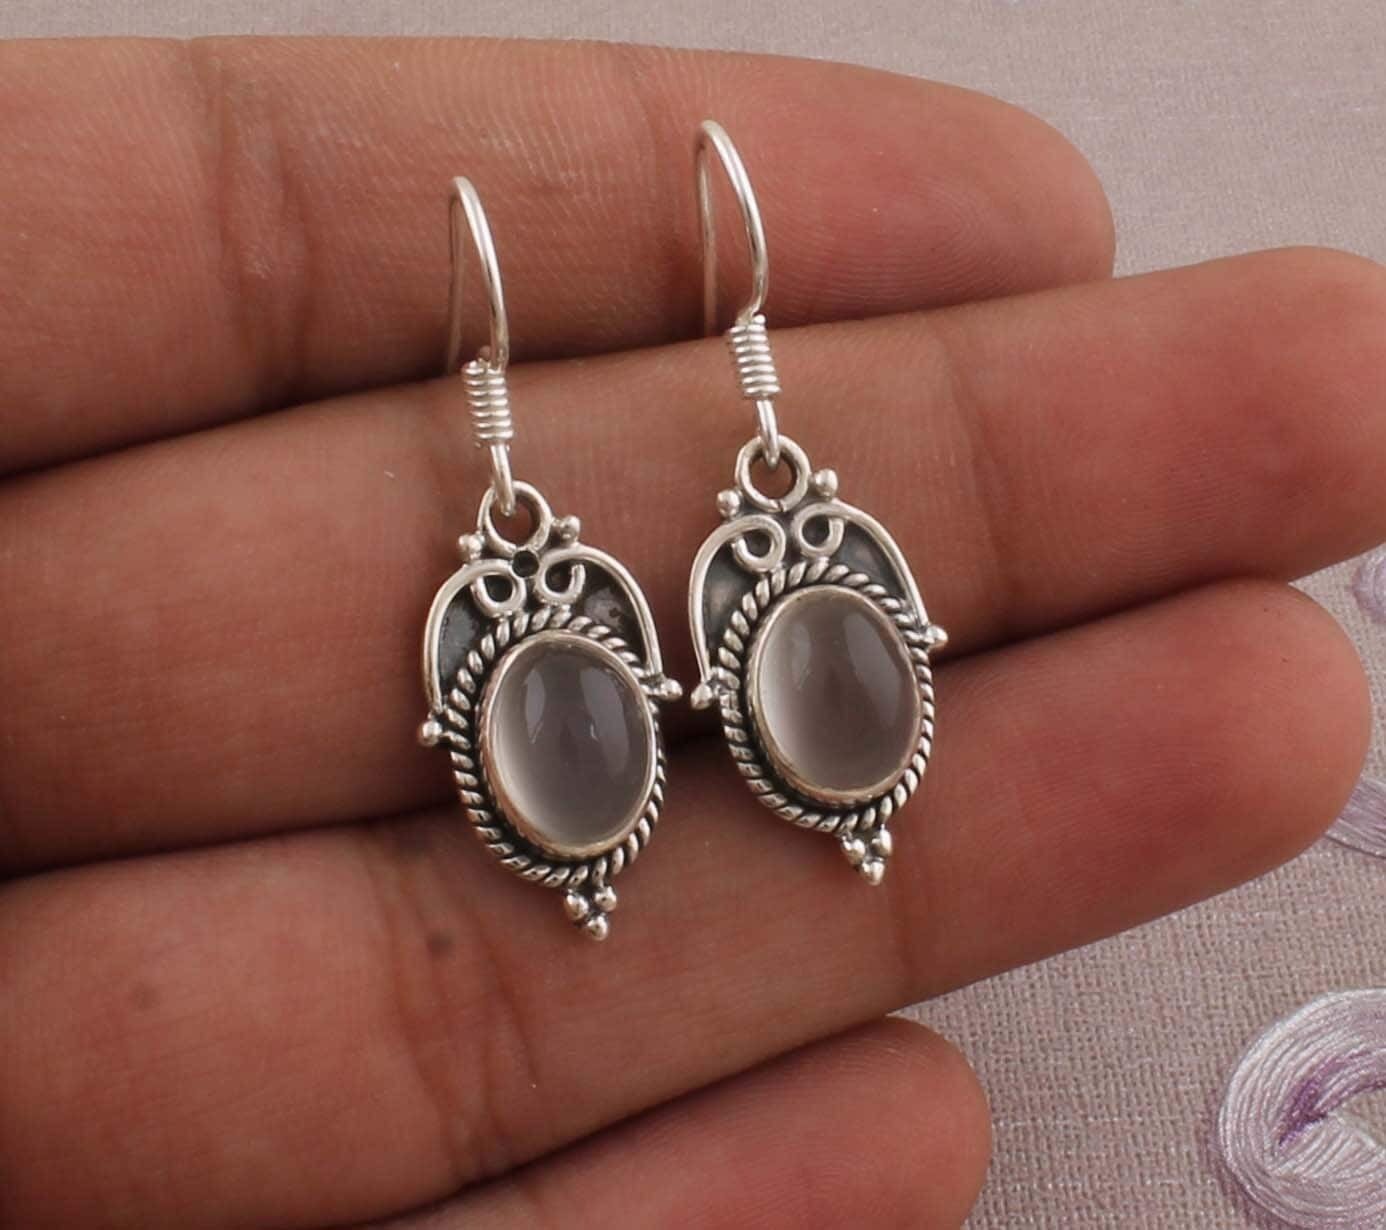 Amazing Moonstone AAA+Quality Gemstone Earring,Oval Cabochon Stone Earring 925-Sterling Silver Earring,Antique Silver Earring Gift For Her